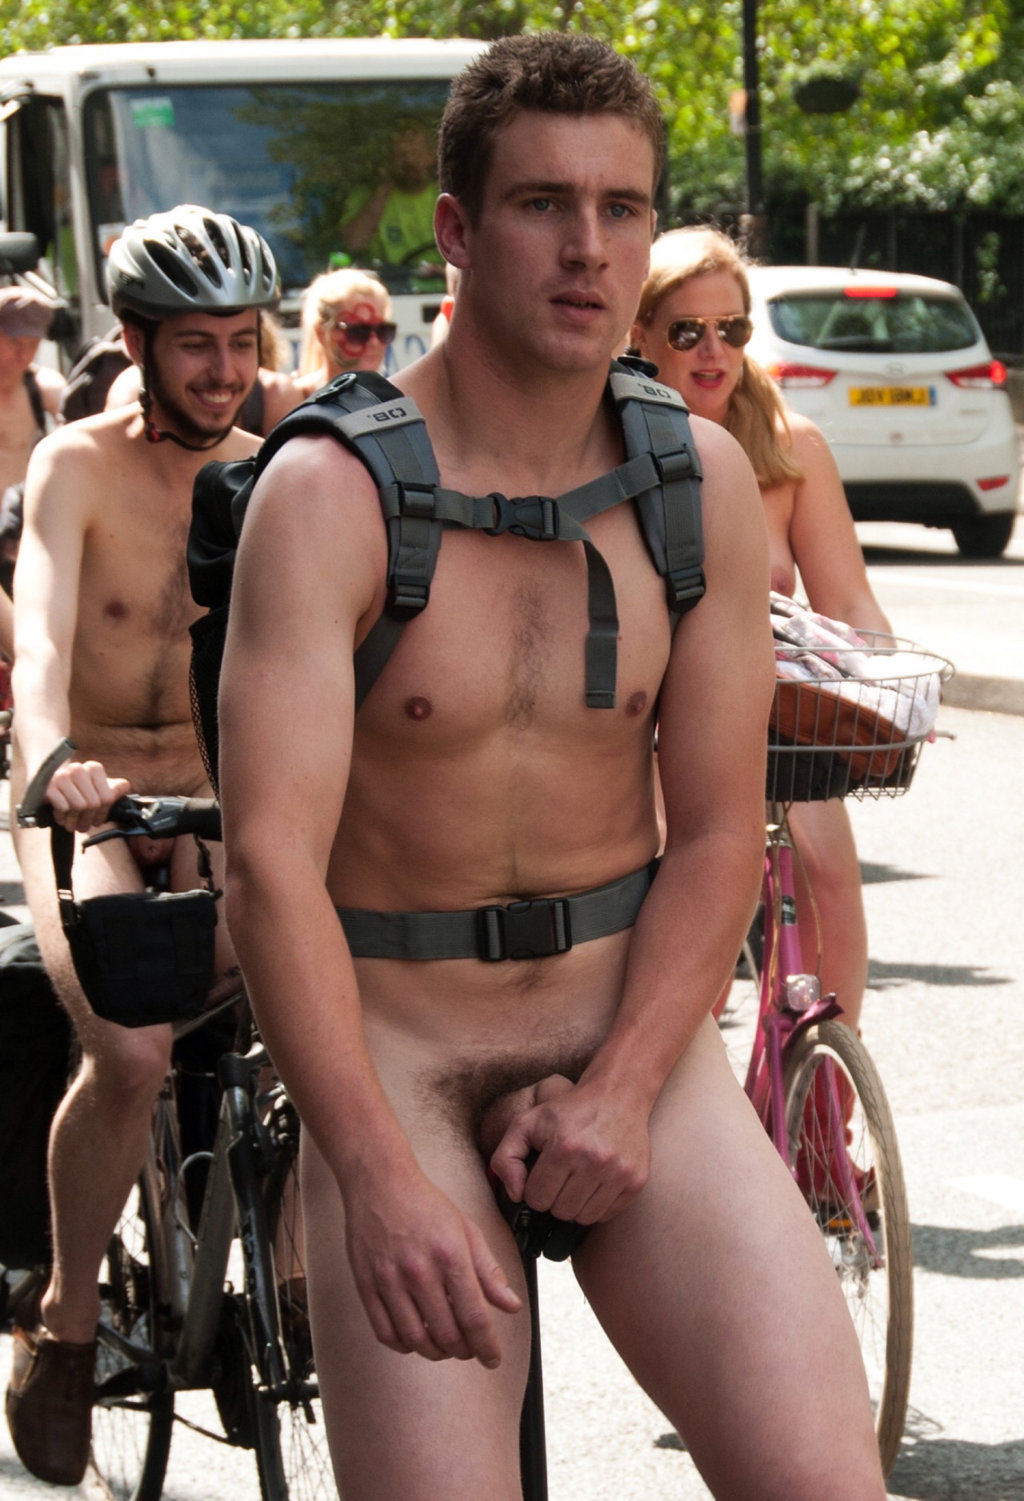 Naked Guys Outdoor Nude Cyclist And Dudes In Public. 